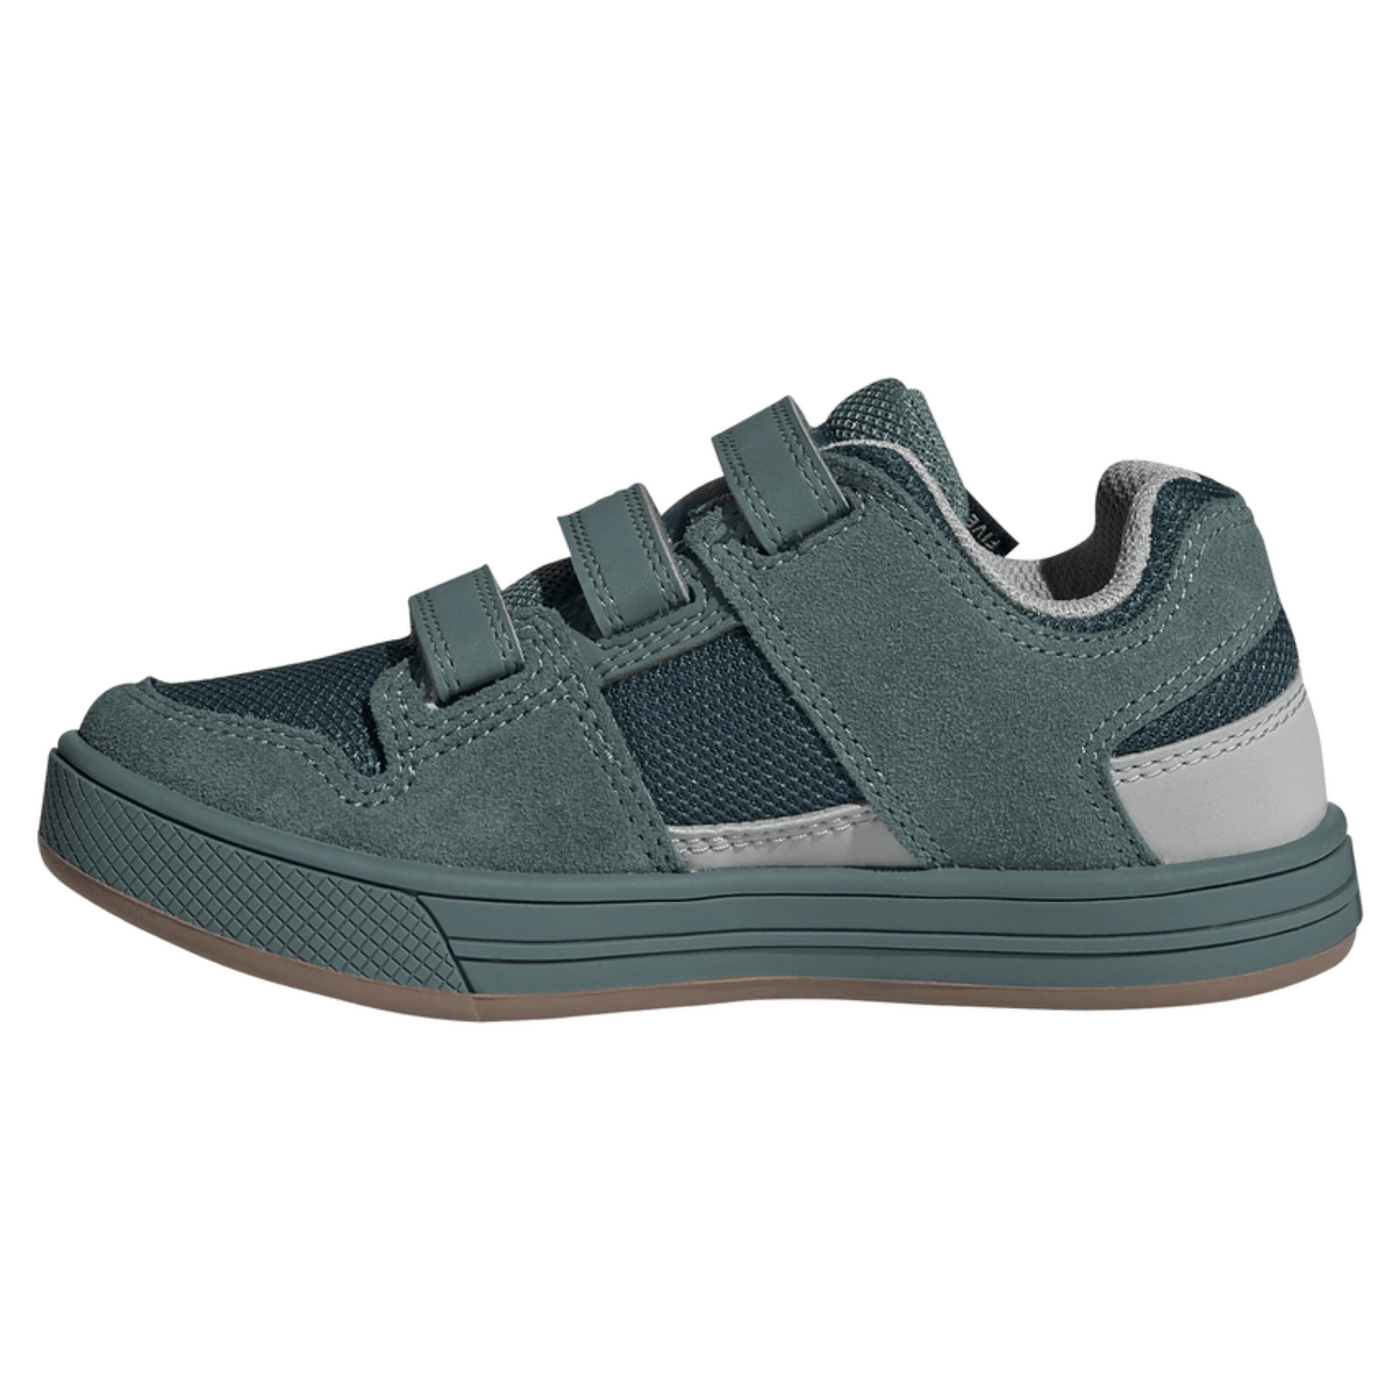 Five Ten Kids Shoes Freerider VCS - Wild Teal 8Lines Shop - Fast Shipping